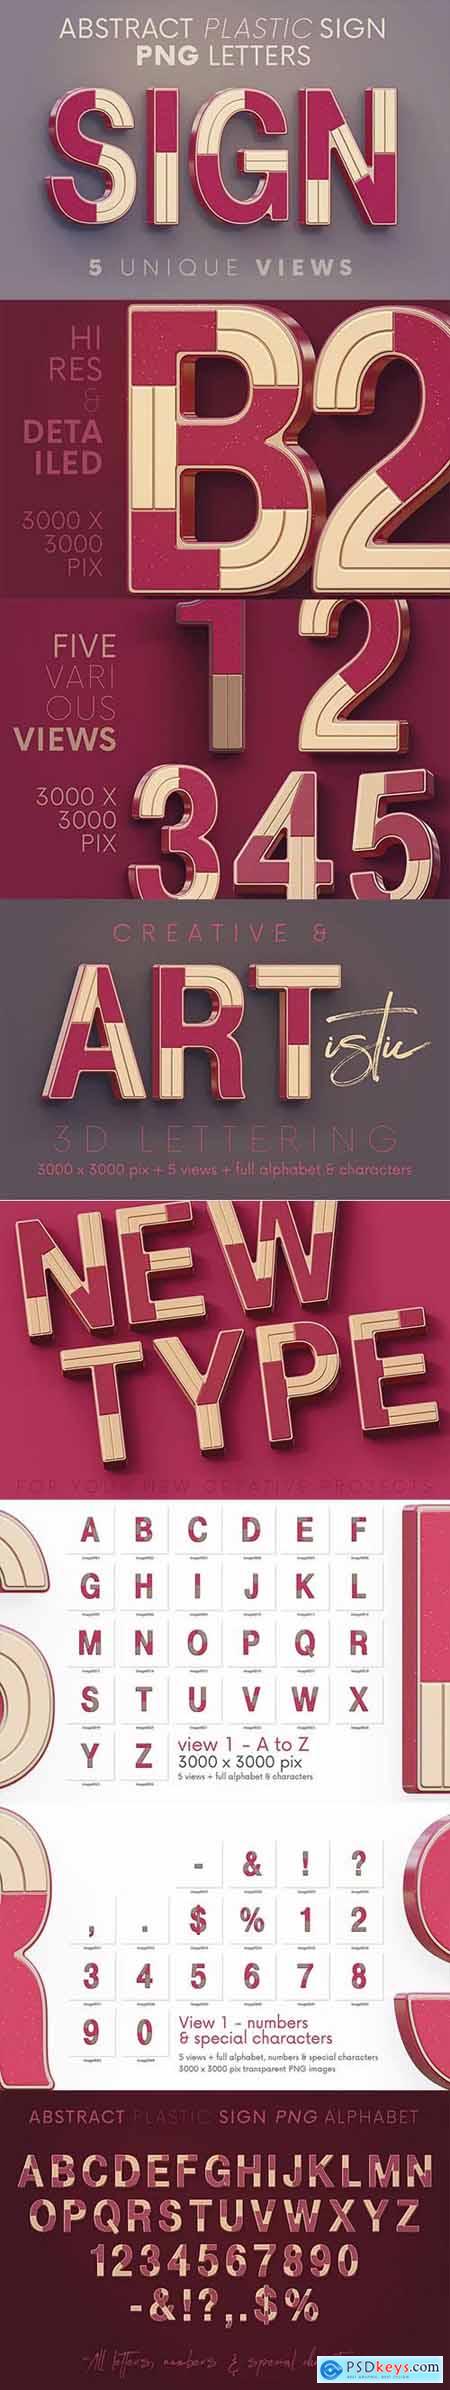 Abstract Plastic Sign - 3D Lettering